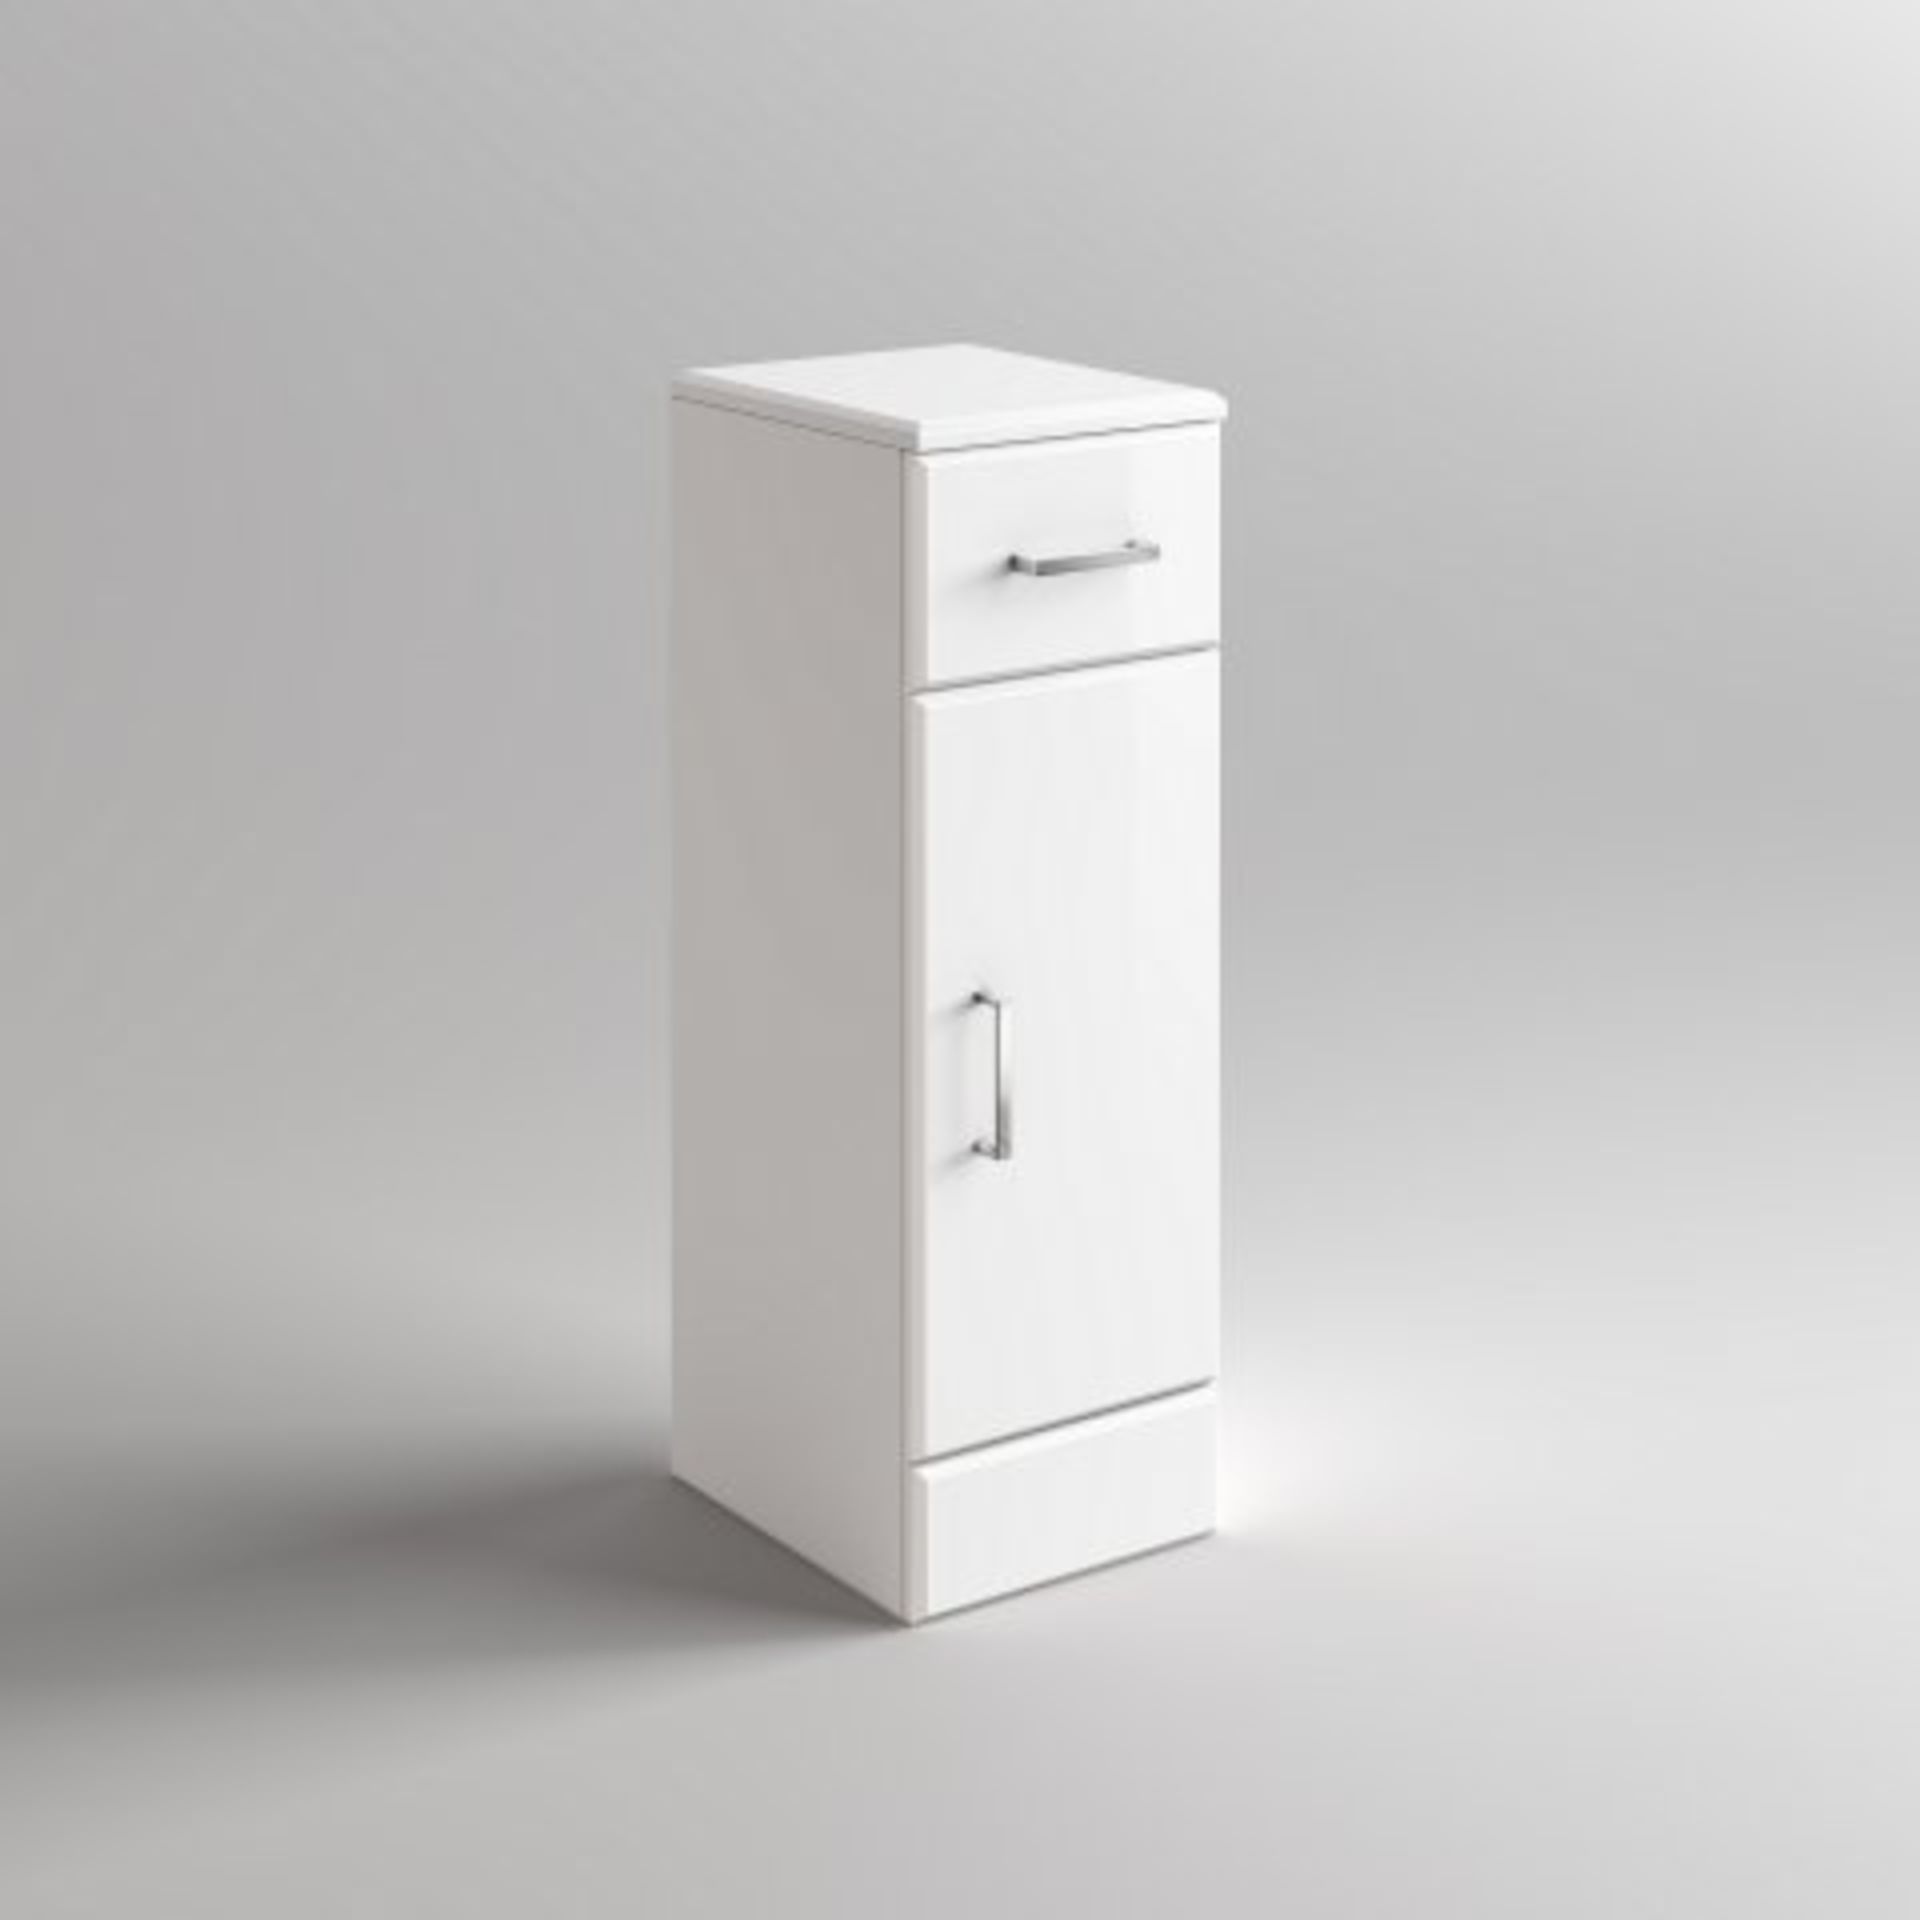 (P203) 250x300mm Quartz Gloss White Small Side Cabinet Unit. RRP £143.99. This state-of-the-art - Image 4 of 4